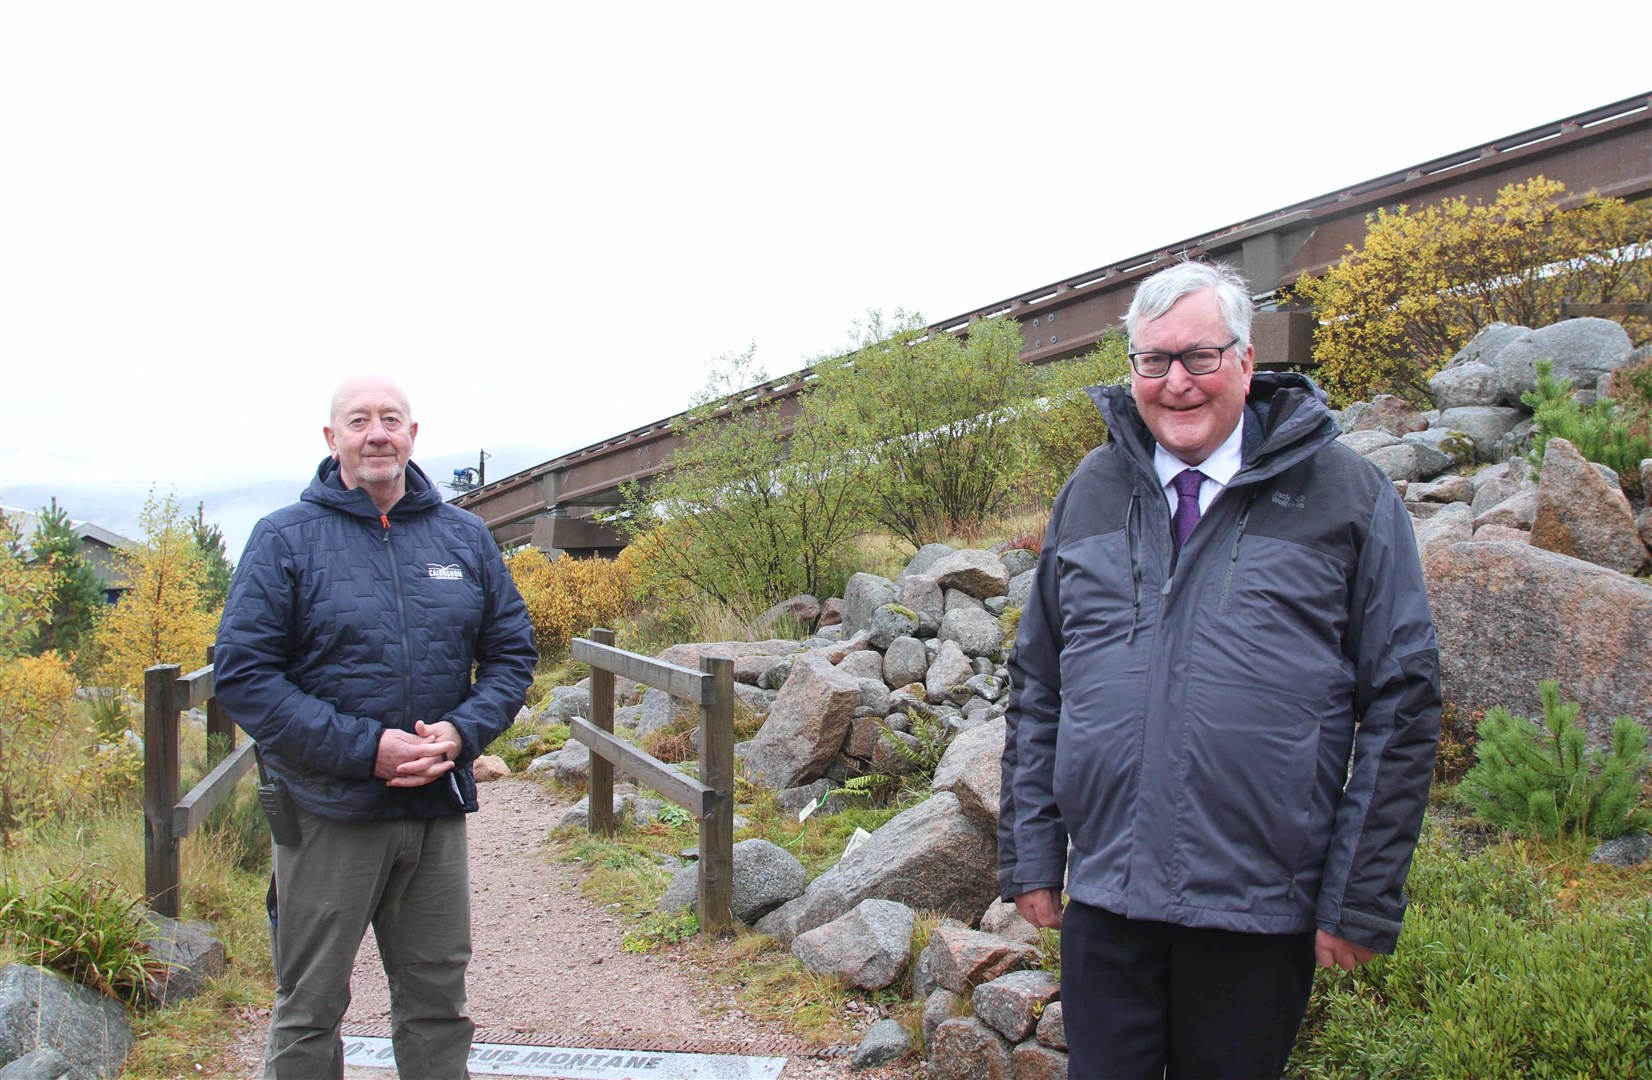 Rural Economy Secretary Fergus Ewing, also MSP for Strathspey, visited the attraction on Monday and was given a tour by the resort's operations manager Colin Matthew.